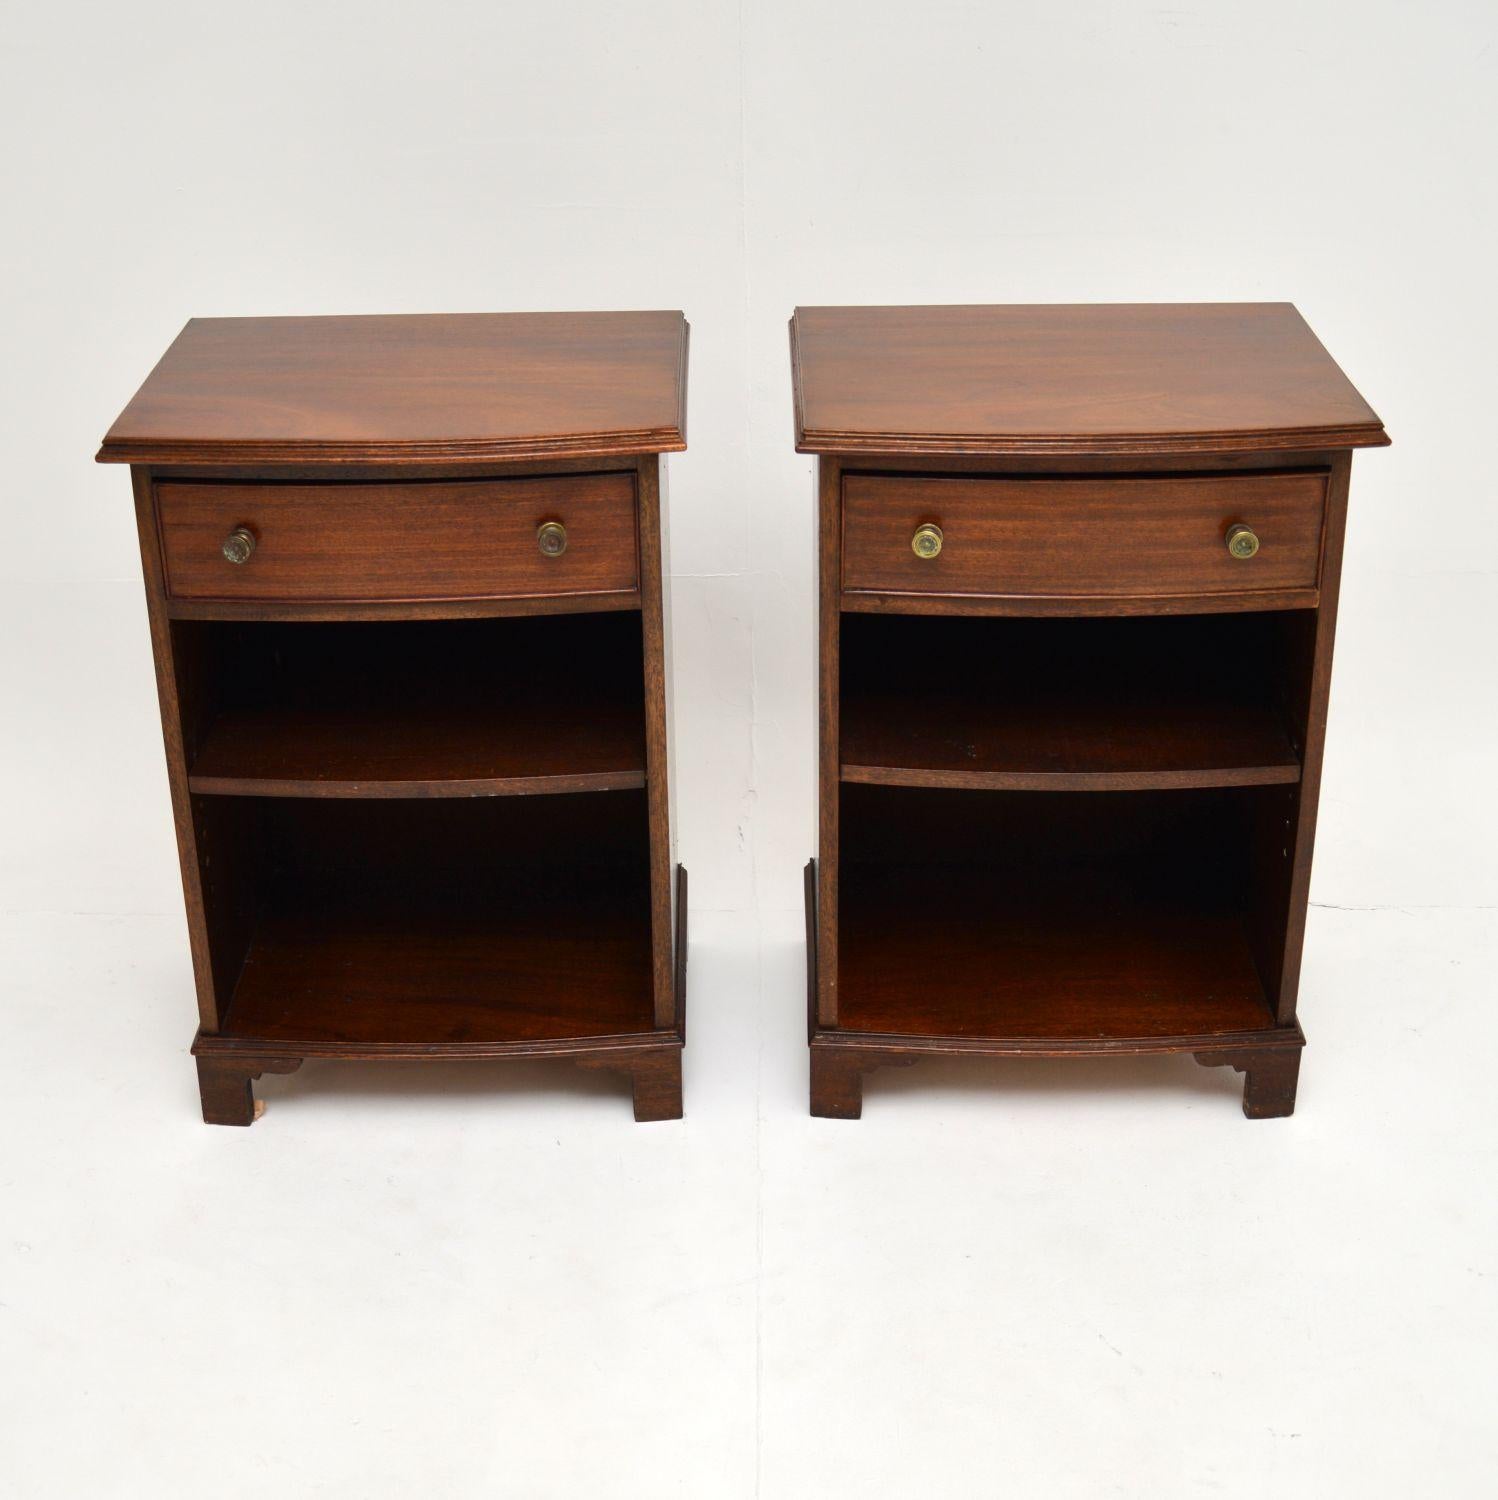 A beautiful and very useful pair of antique Georgian style wooden bow fronted bedside cabinets. These were made in England & they date from around the 1900-1920’s period.

The quality is excellent, these are well made and have a lovely, simple